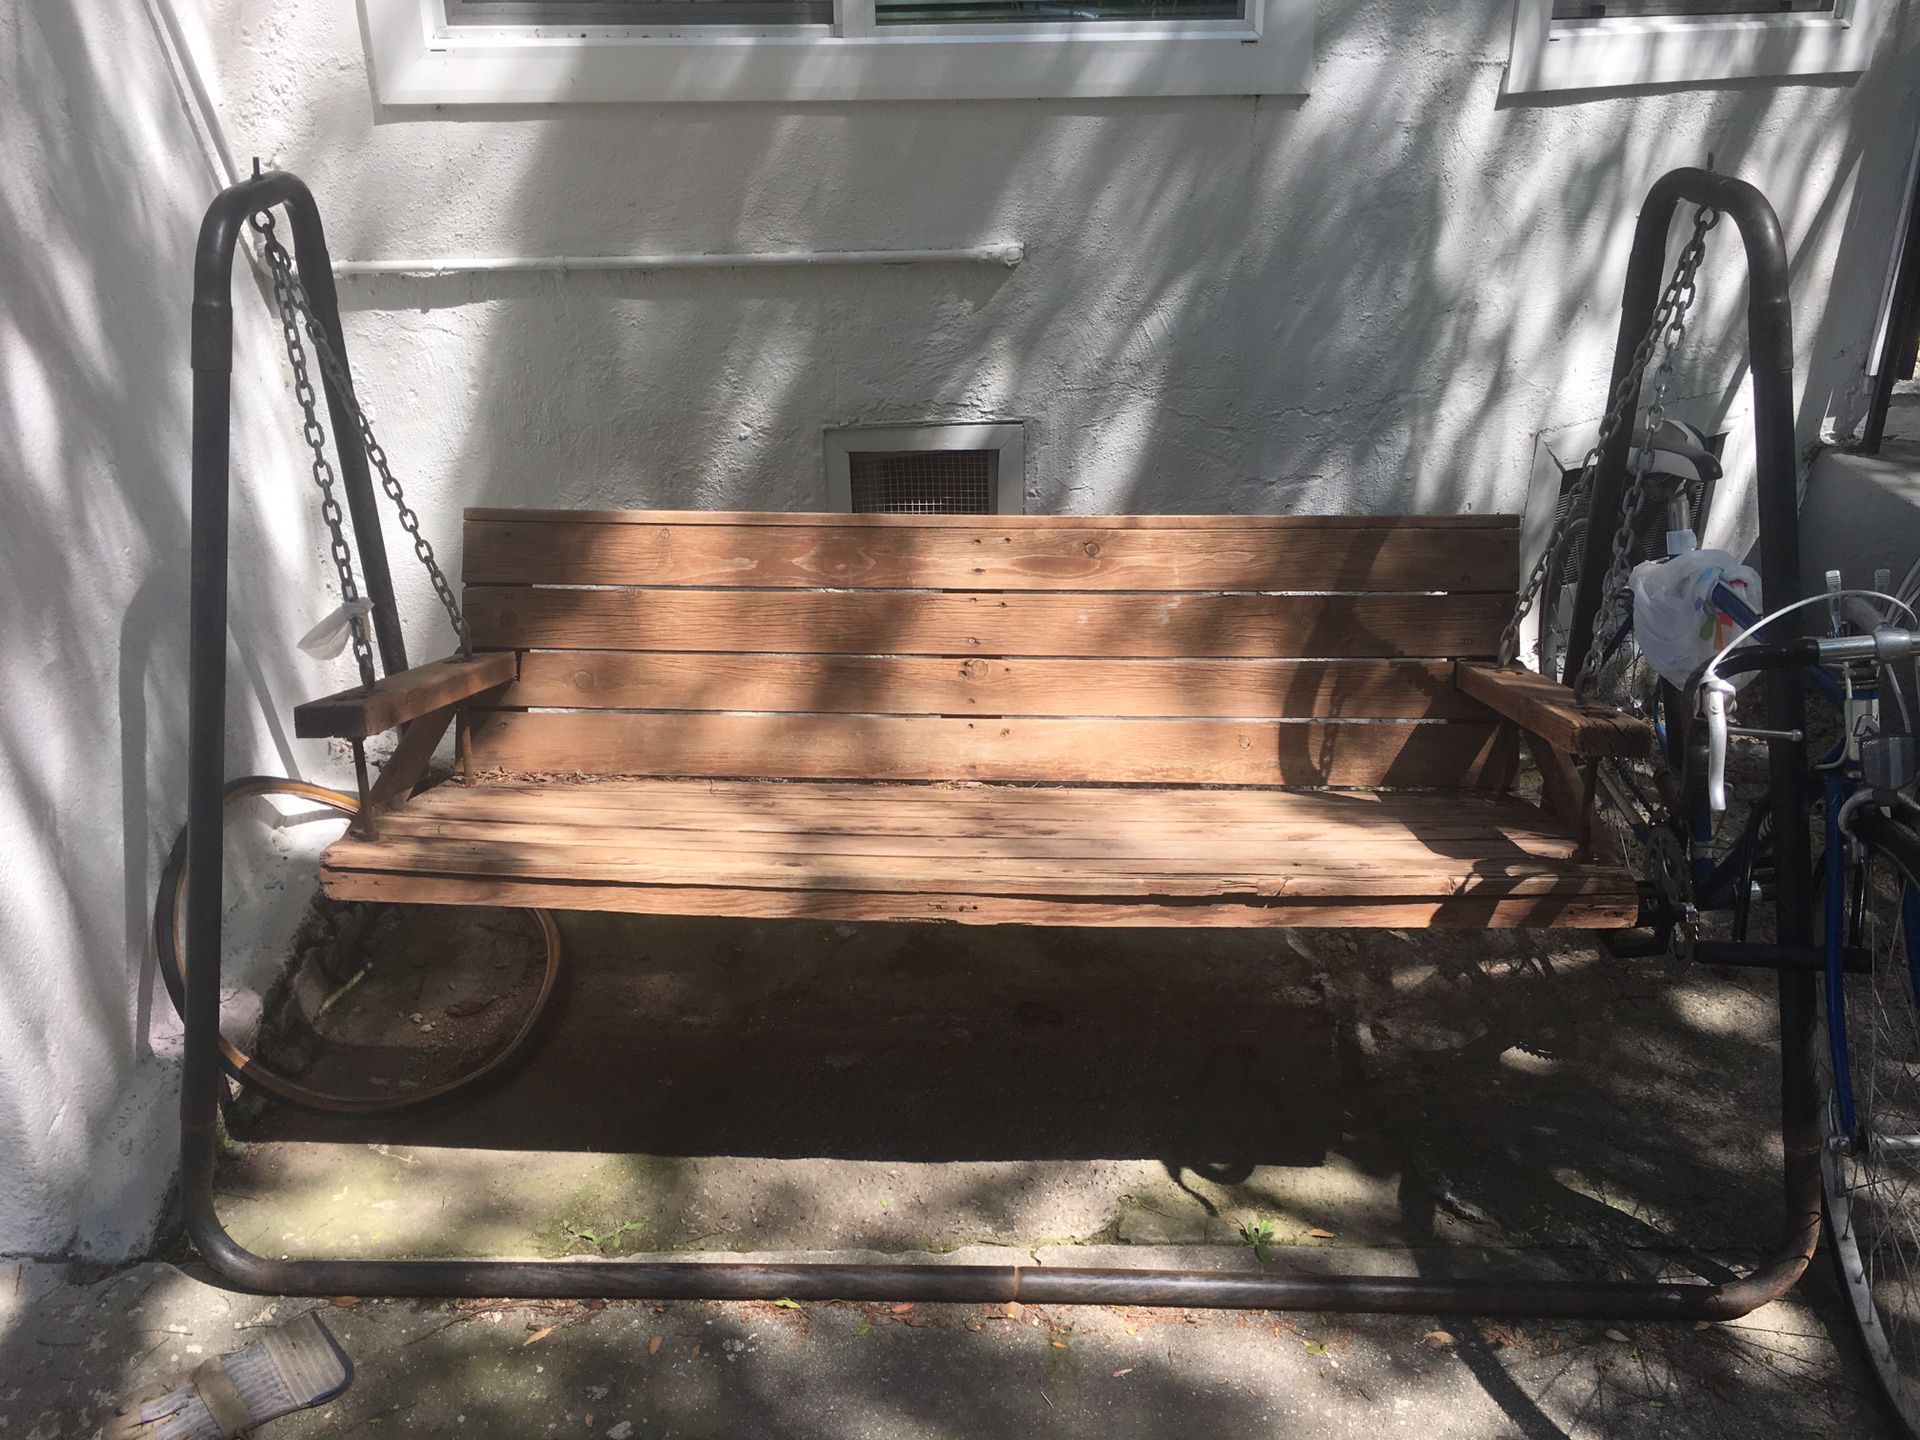 Porch swing with frame, bench swing, stand alone swing